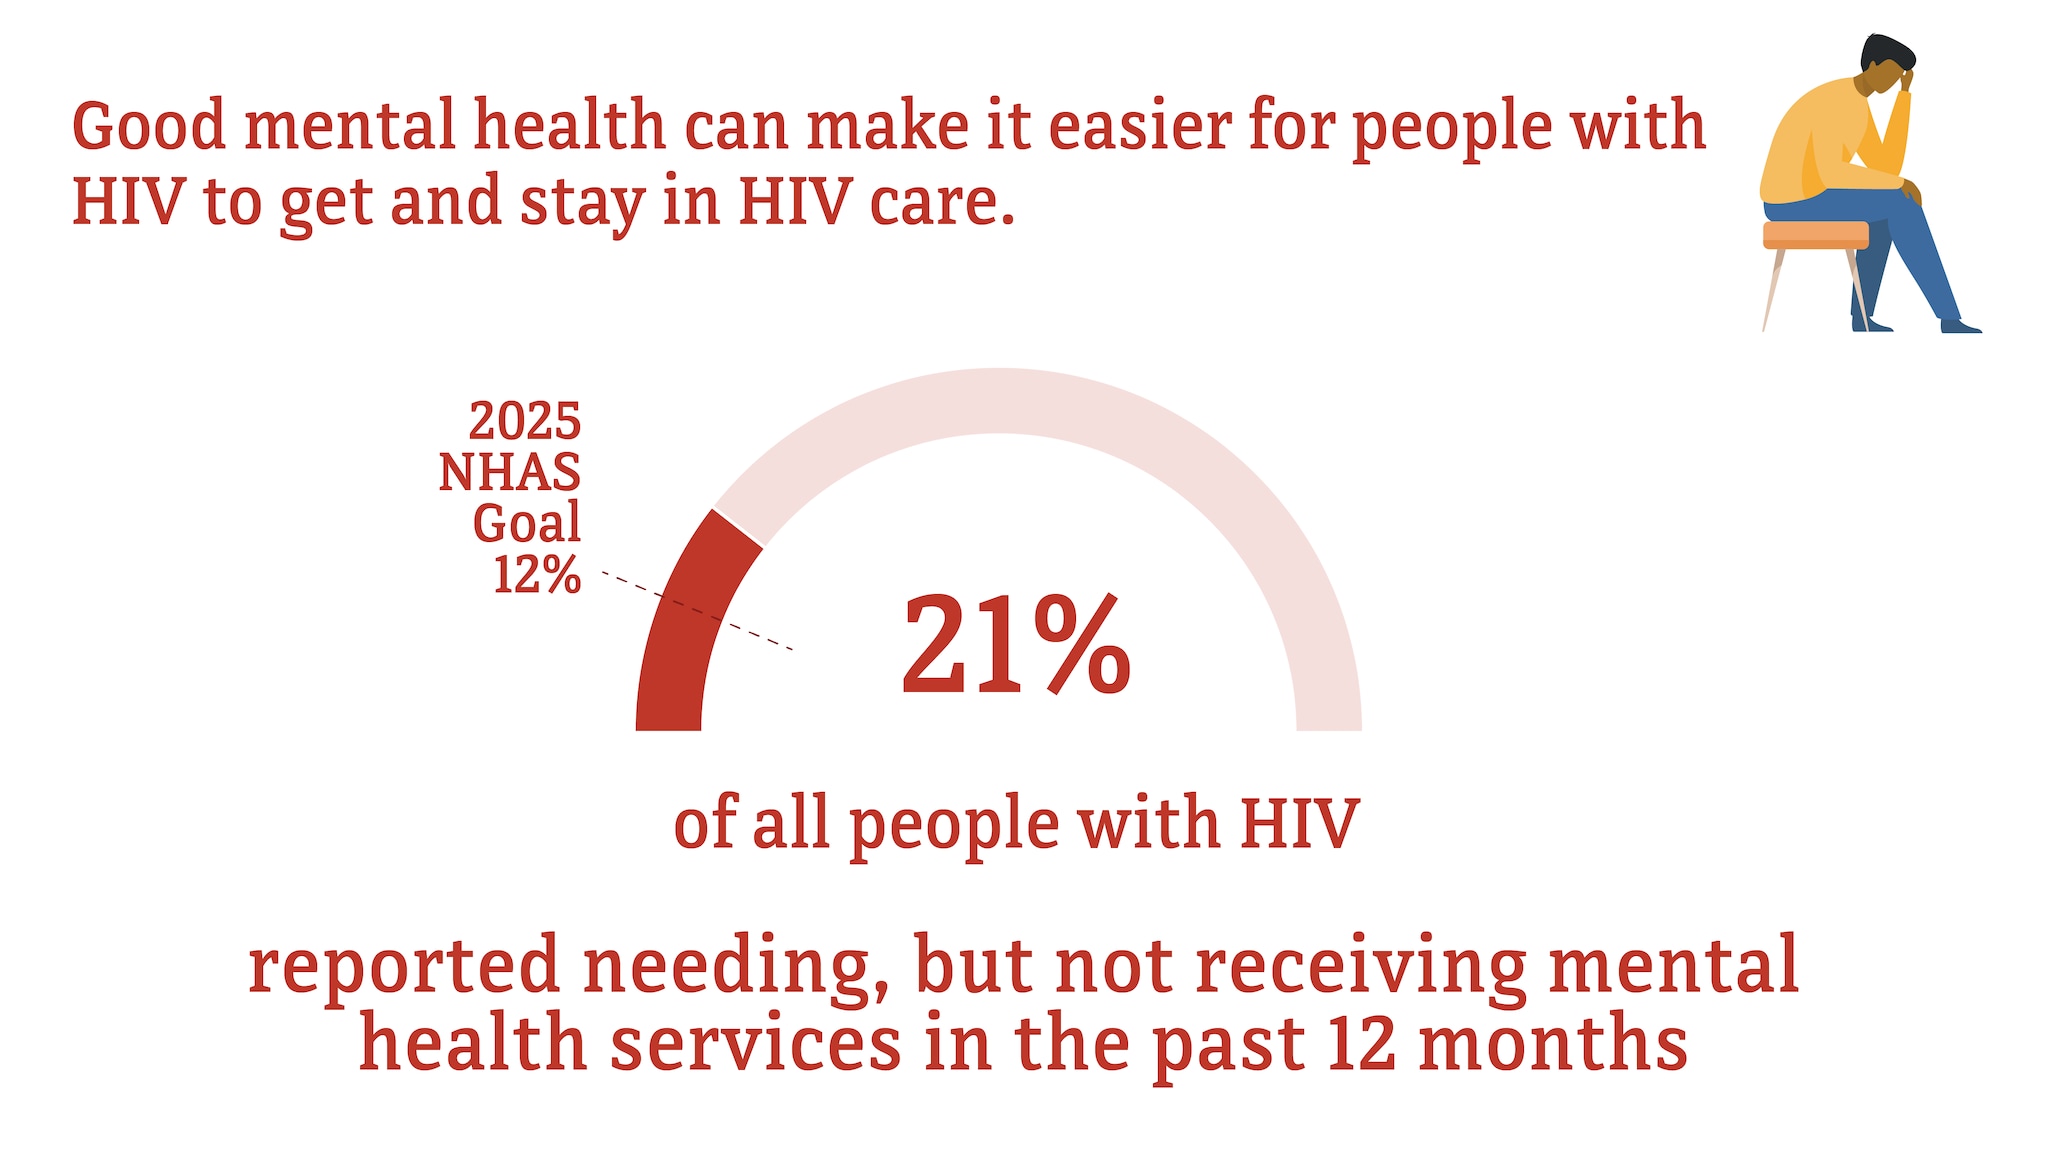 Good mental health can make it easier for people with HIV to get and stay in HIV care. In 2020, 21 percent of all people with HIV reported, needing, but not receiving mental health services in the past 12 months. The 2025 NHAS goal is 12 percent.